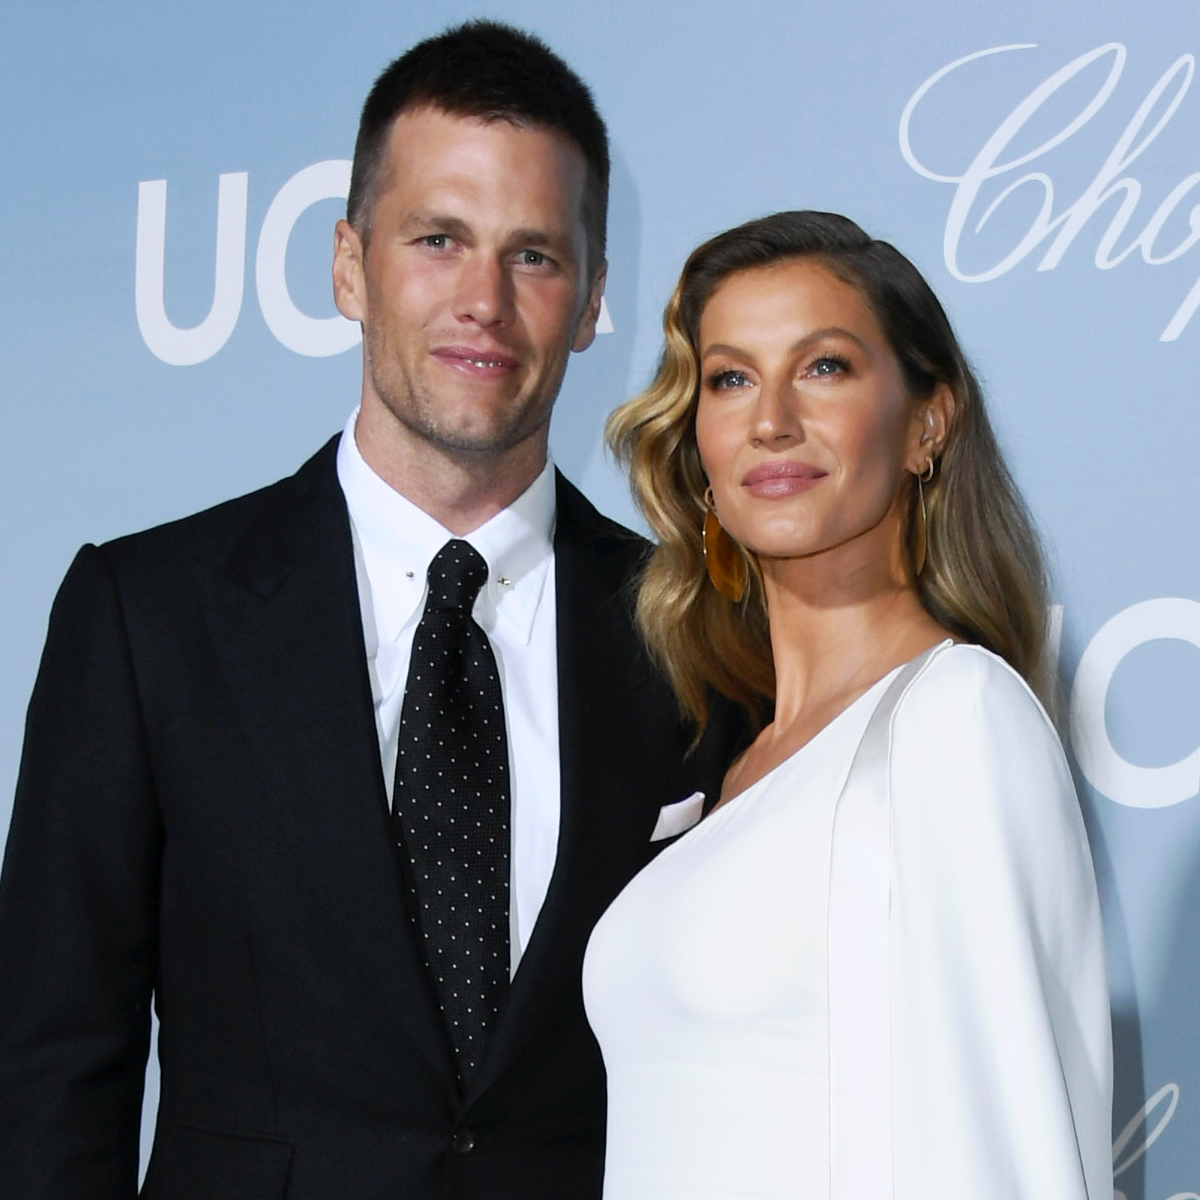 Tom Brady Carries Louis Vuitton Bag from Campaign Starring Gisele Bündchen